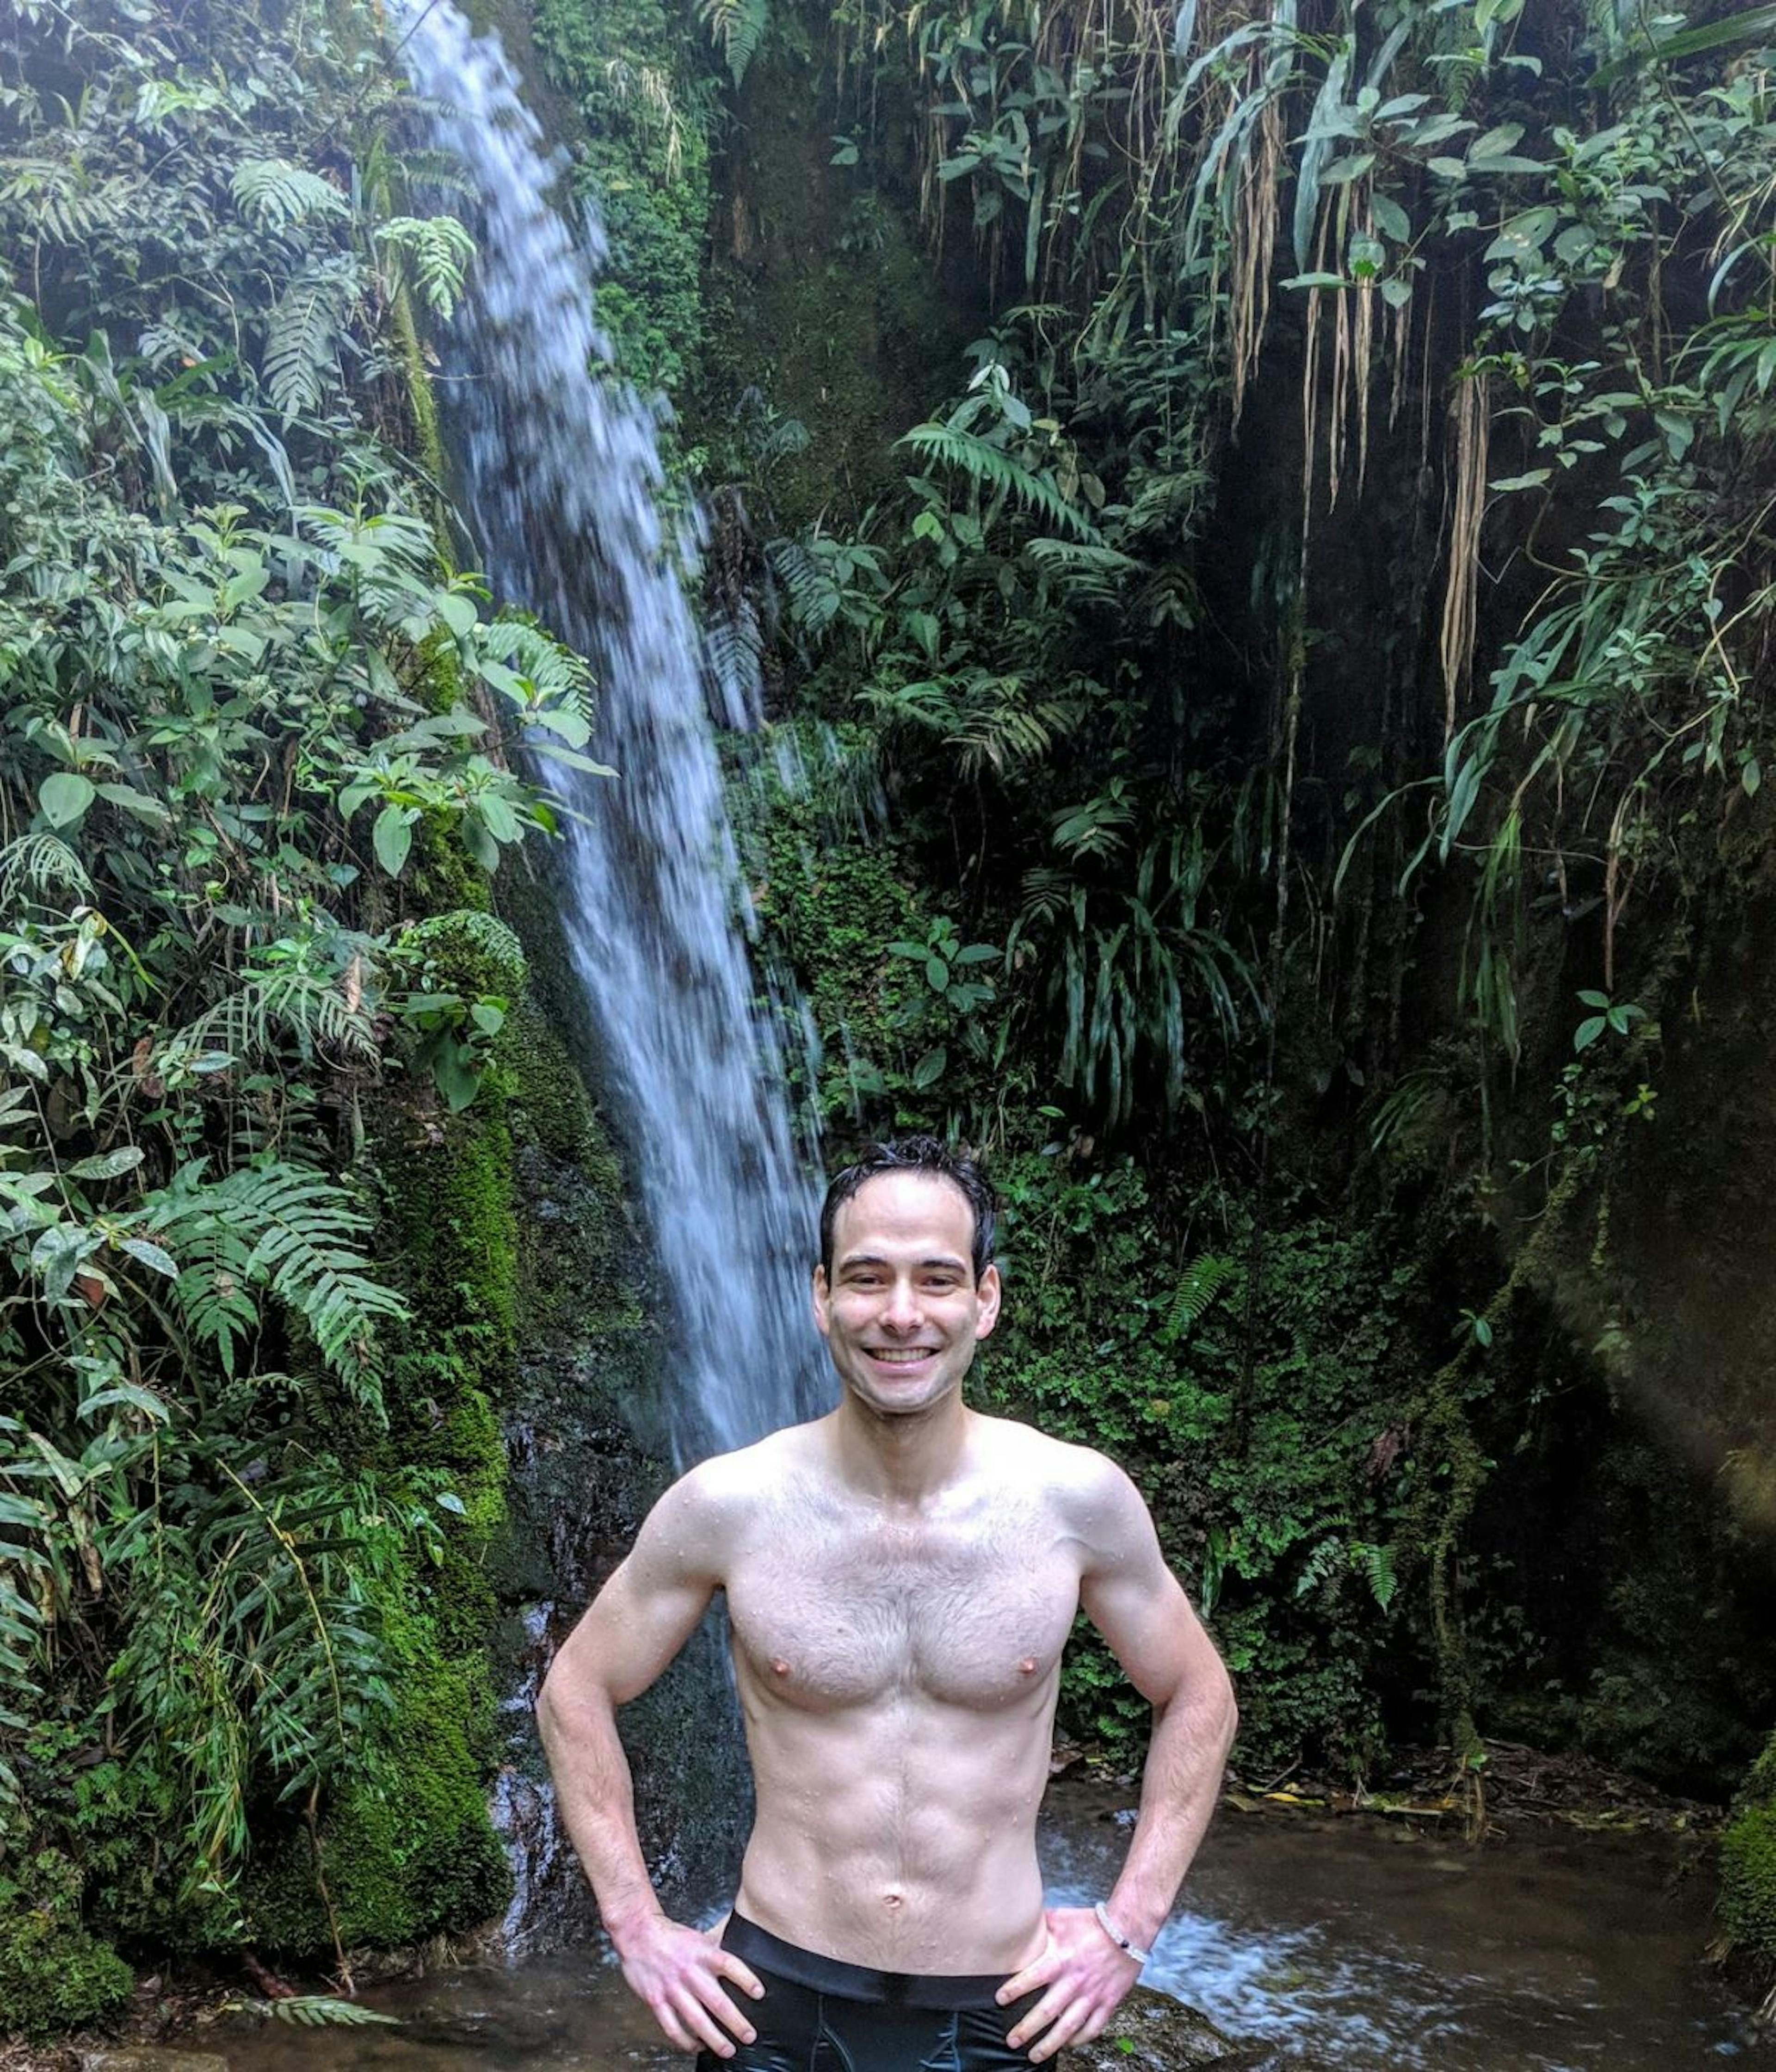 Photo credit: Ely Roa, Me in the Cuevas del Higueron waterfall, totally not cold at all